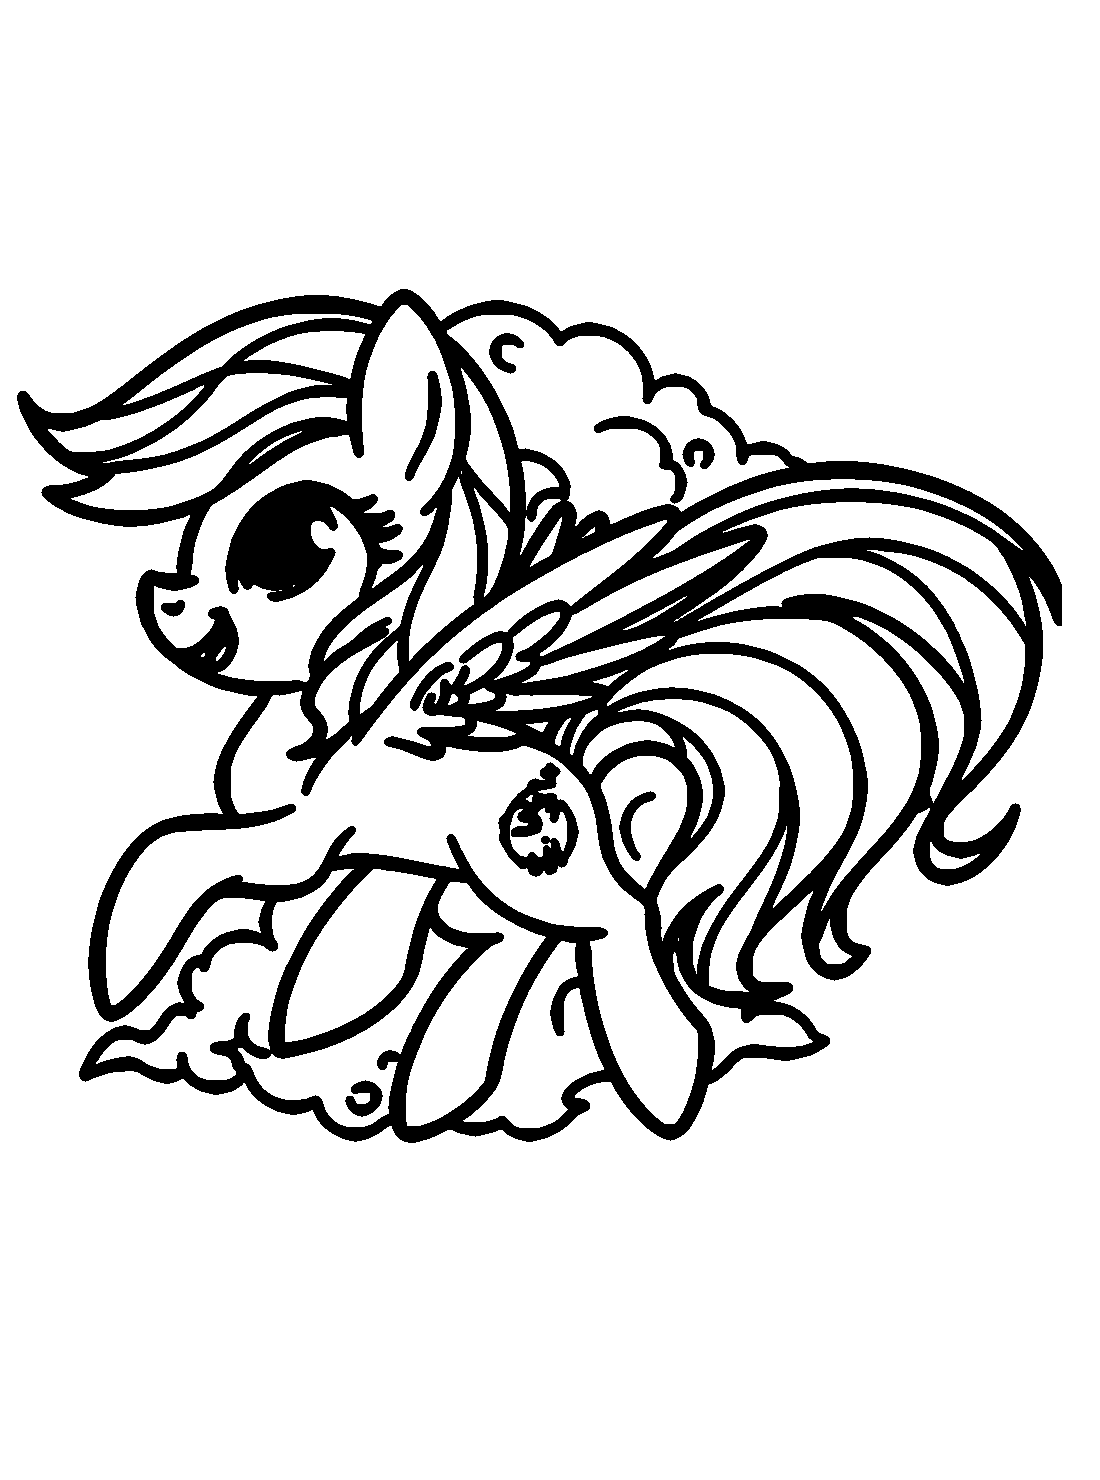 Rainbow Dash Free Coloring Pages